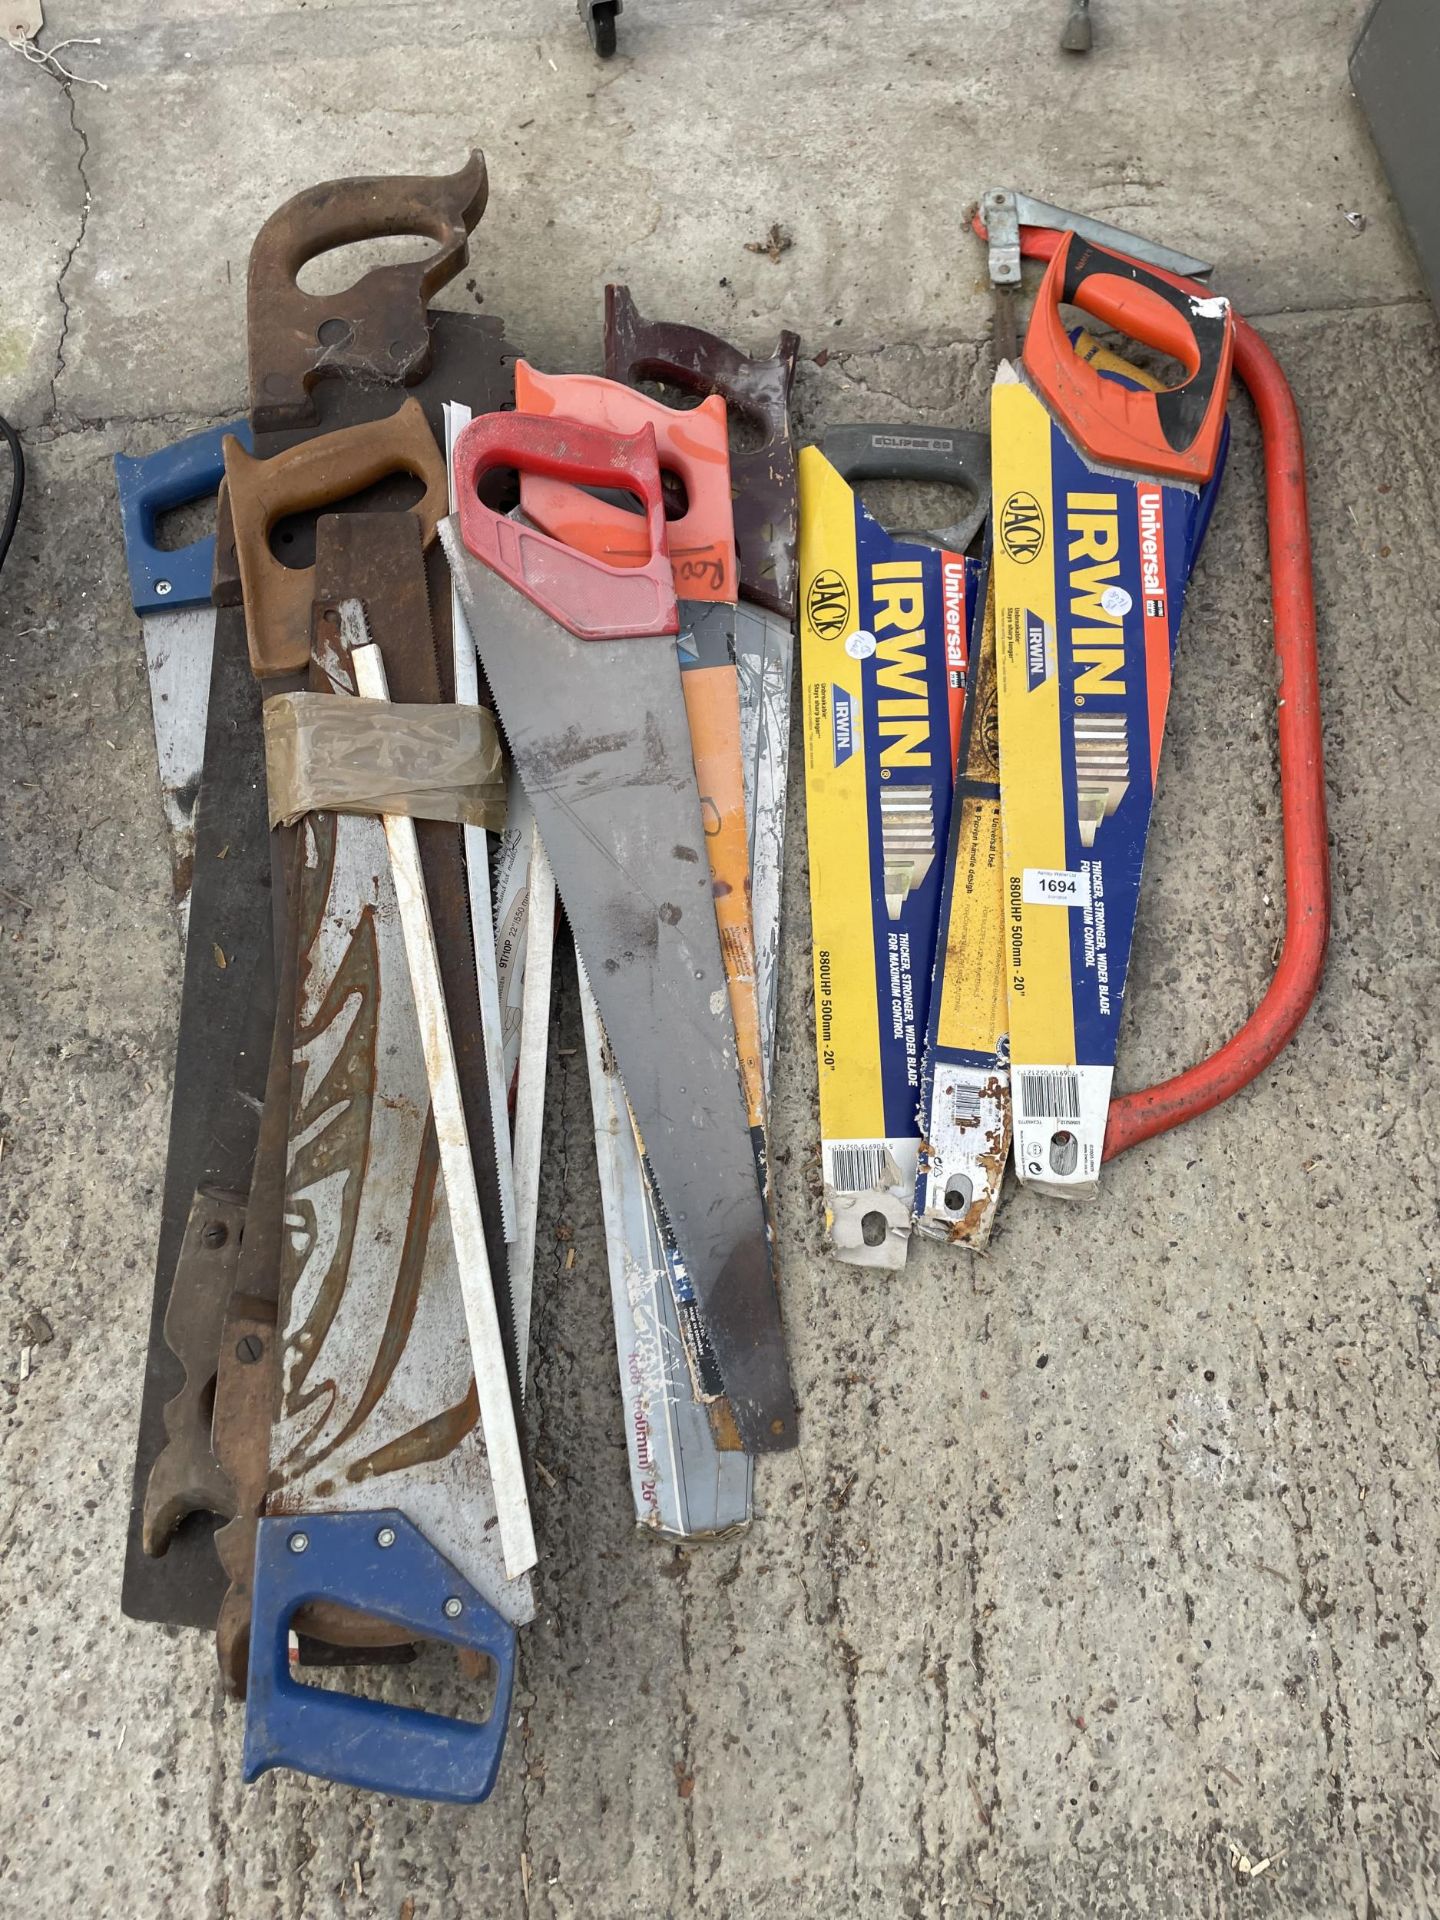 A LARGE ASSORTMENT OF VARIOUS HAND SAWS